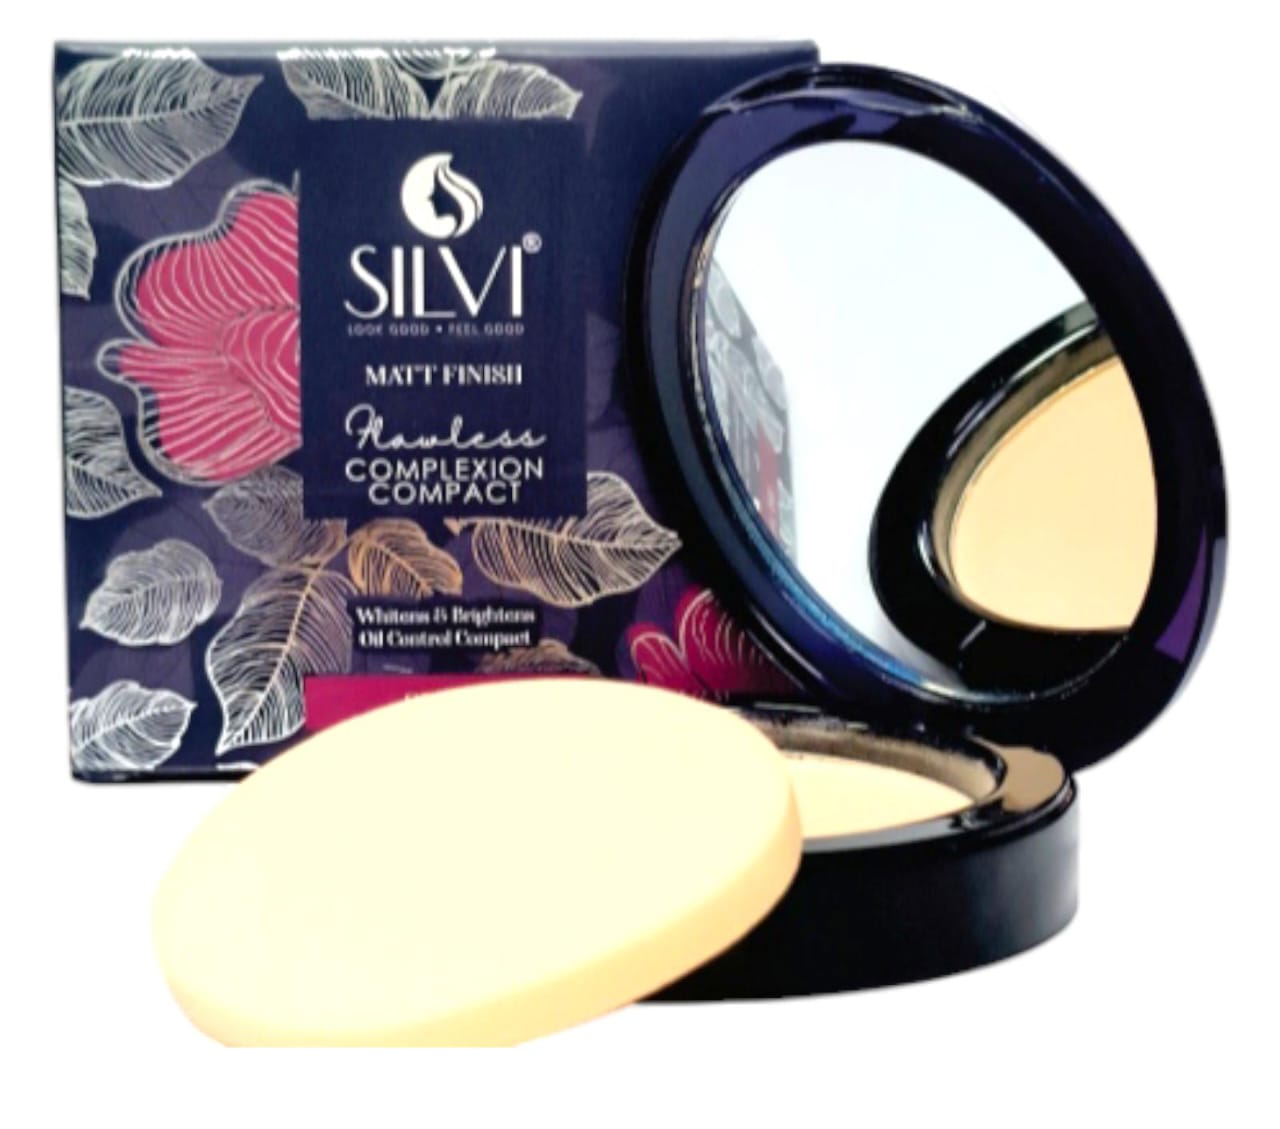 Silvi Flawless Complexion Compact